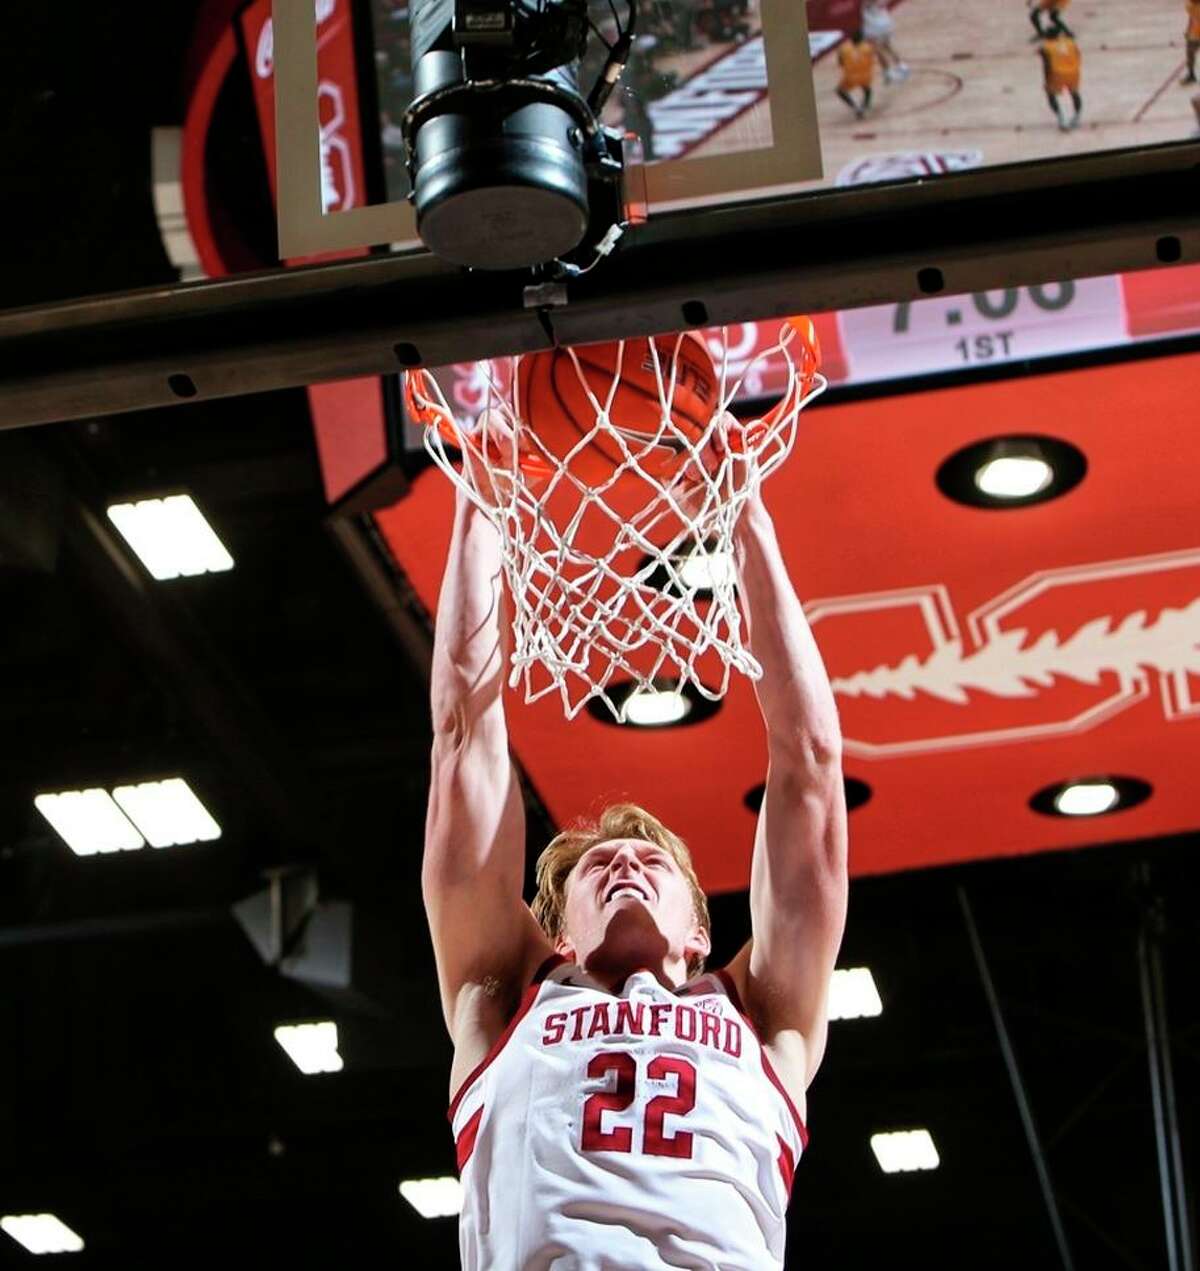 Stanford’s James Keefe enjoys a high-percentage shot in the Cardinal’s easy victory over Valparaiso at Maples Pavilion.